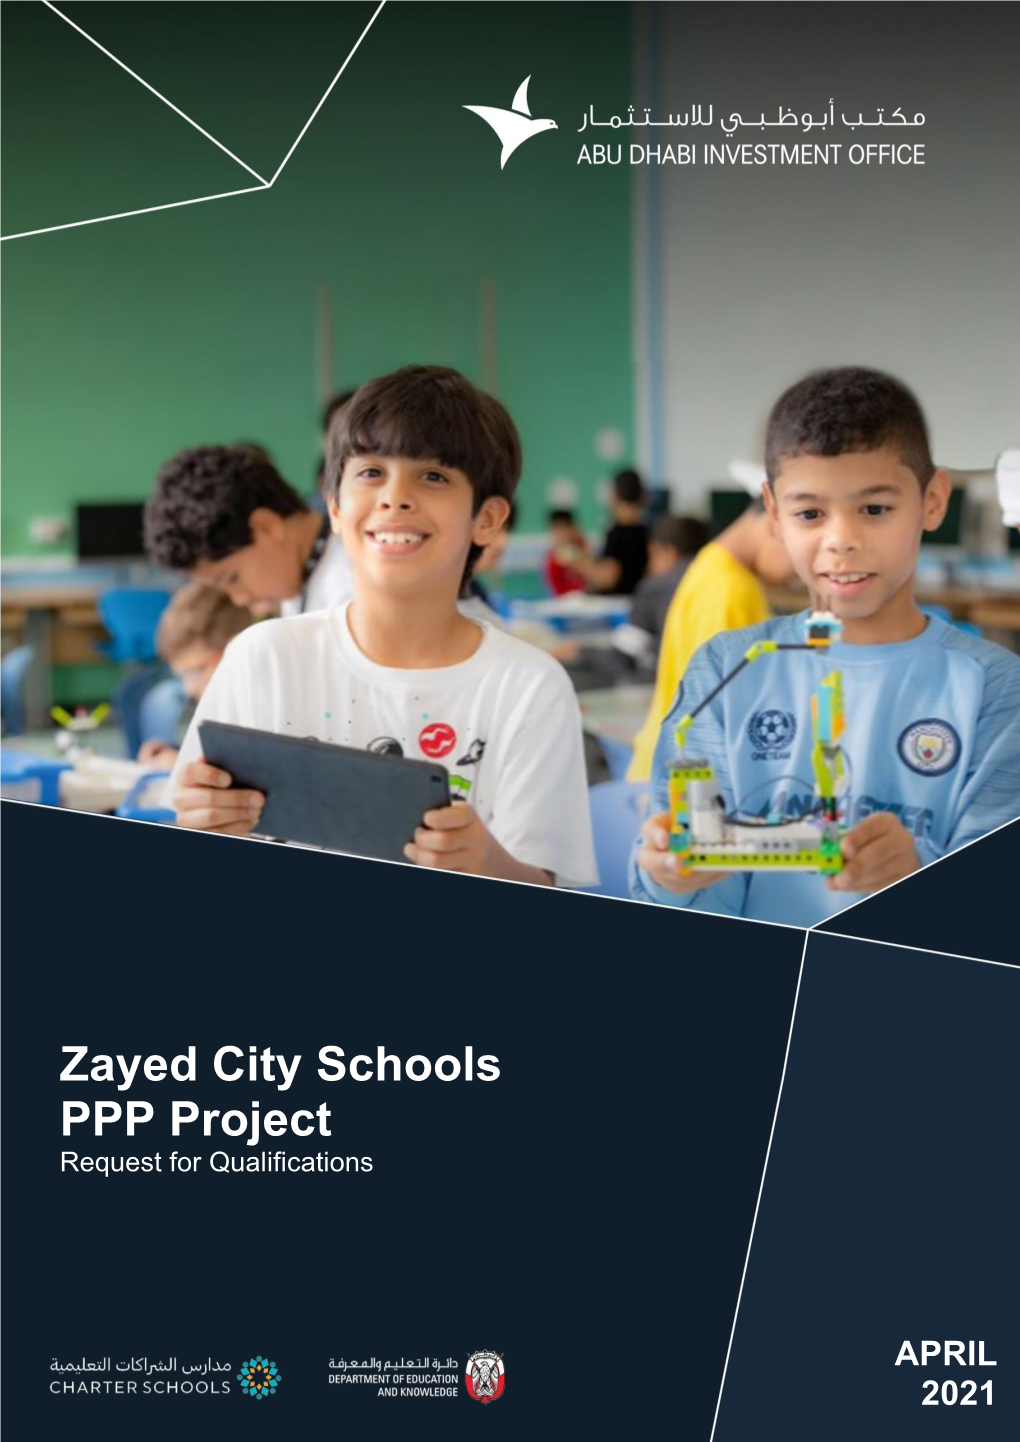 Zayed City Schools PPP Project Request for Qualifications